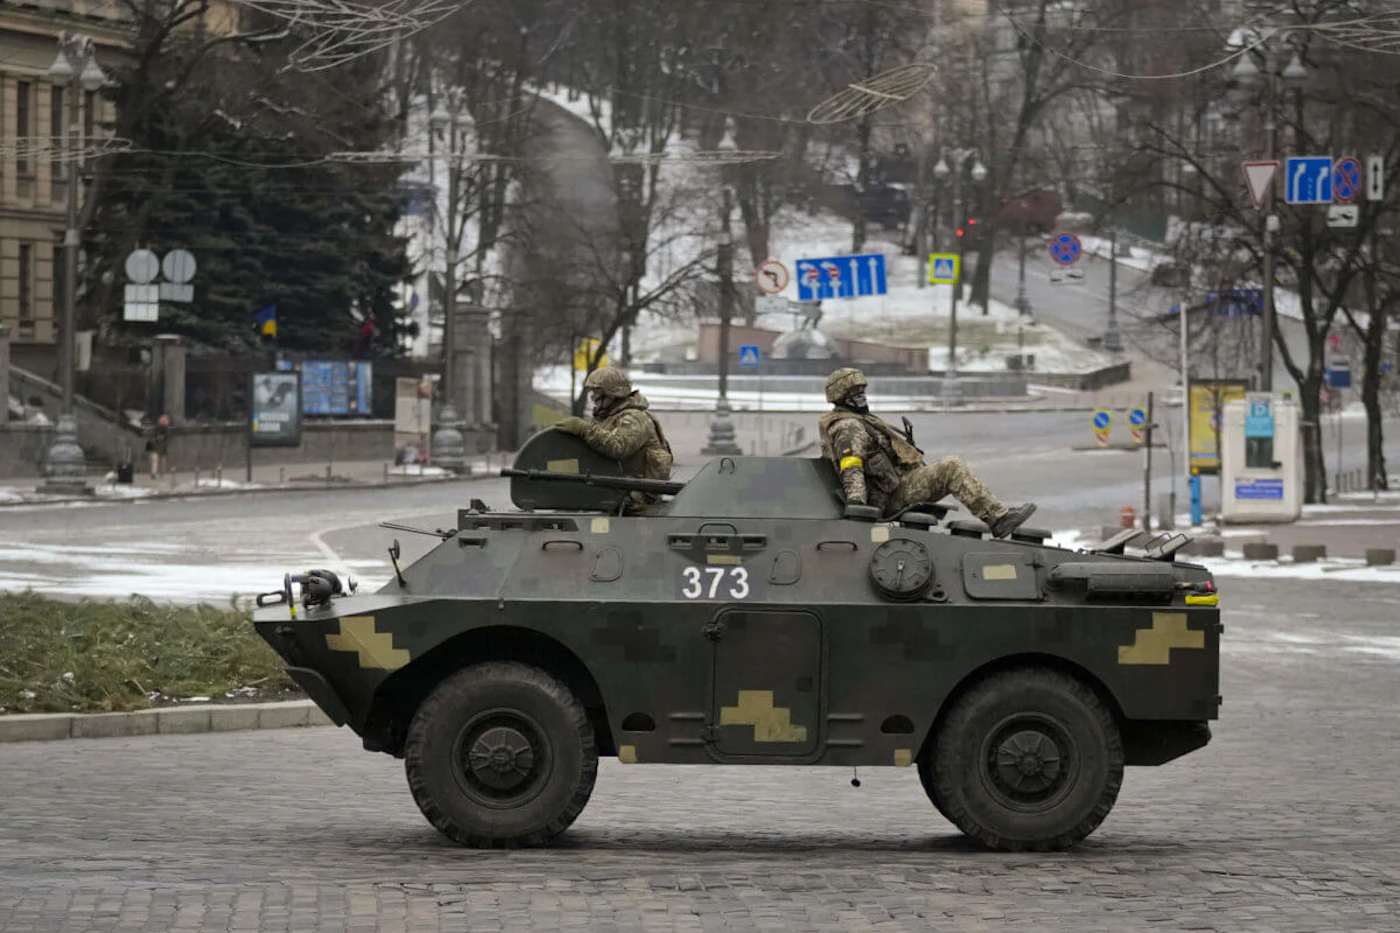 Ukrainian servicemen ride on top of an armored personnel carrier speeding down a deserted boulevard during an air raid alarm, in Kyiv, Ukraine, Tuesday, March 1, 2022. The U.N.'s refugees chief is warning that many more vulnerable people will begin fleeing their homes in Ukraine if Russia's military offensive continues and further urban areas are hit. (AP Photo/Vadim Ghirda)